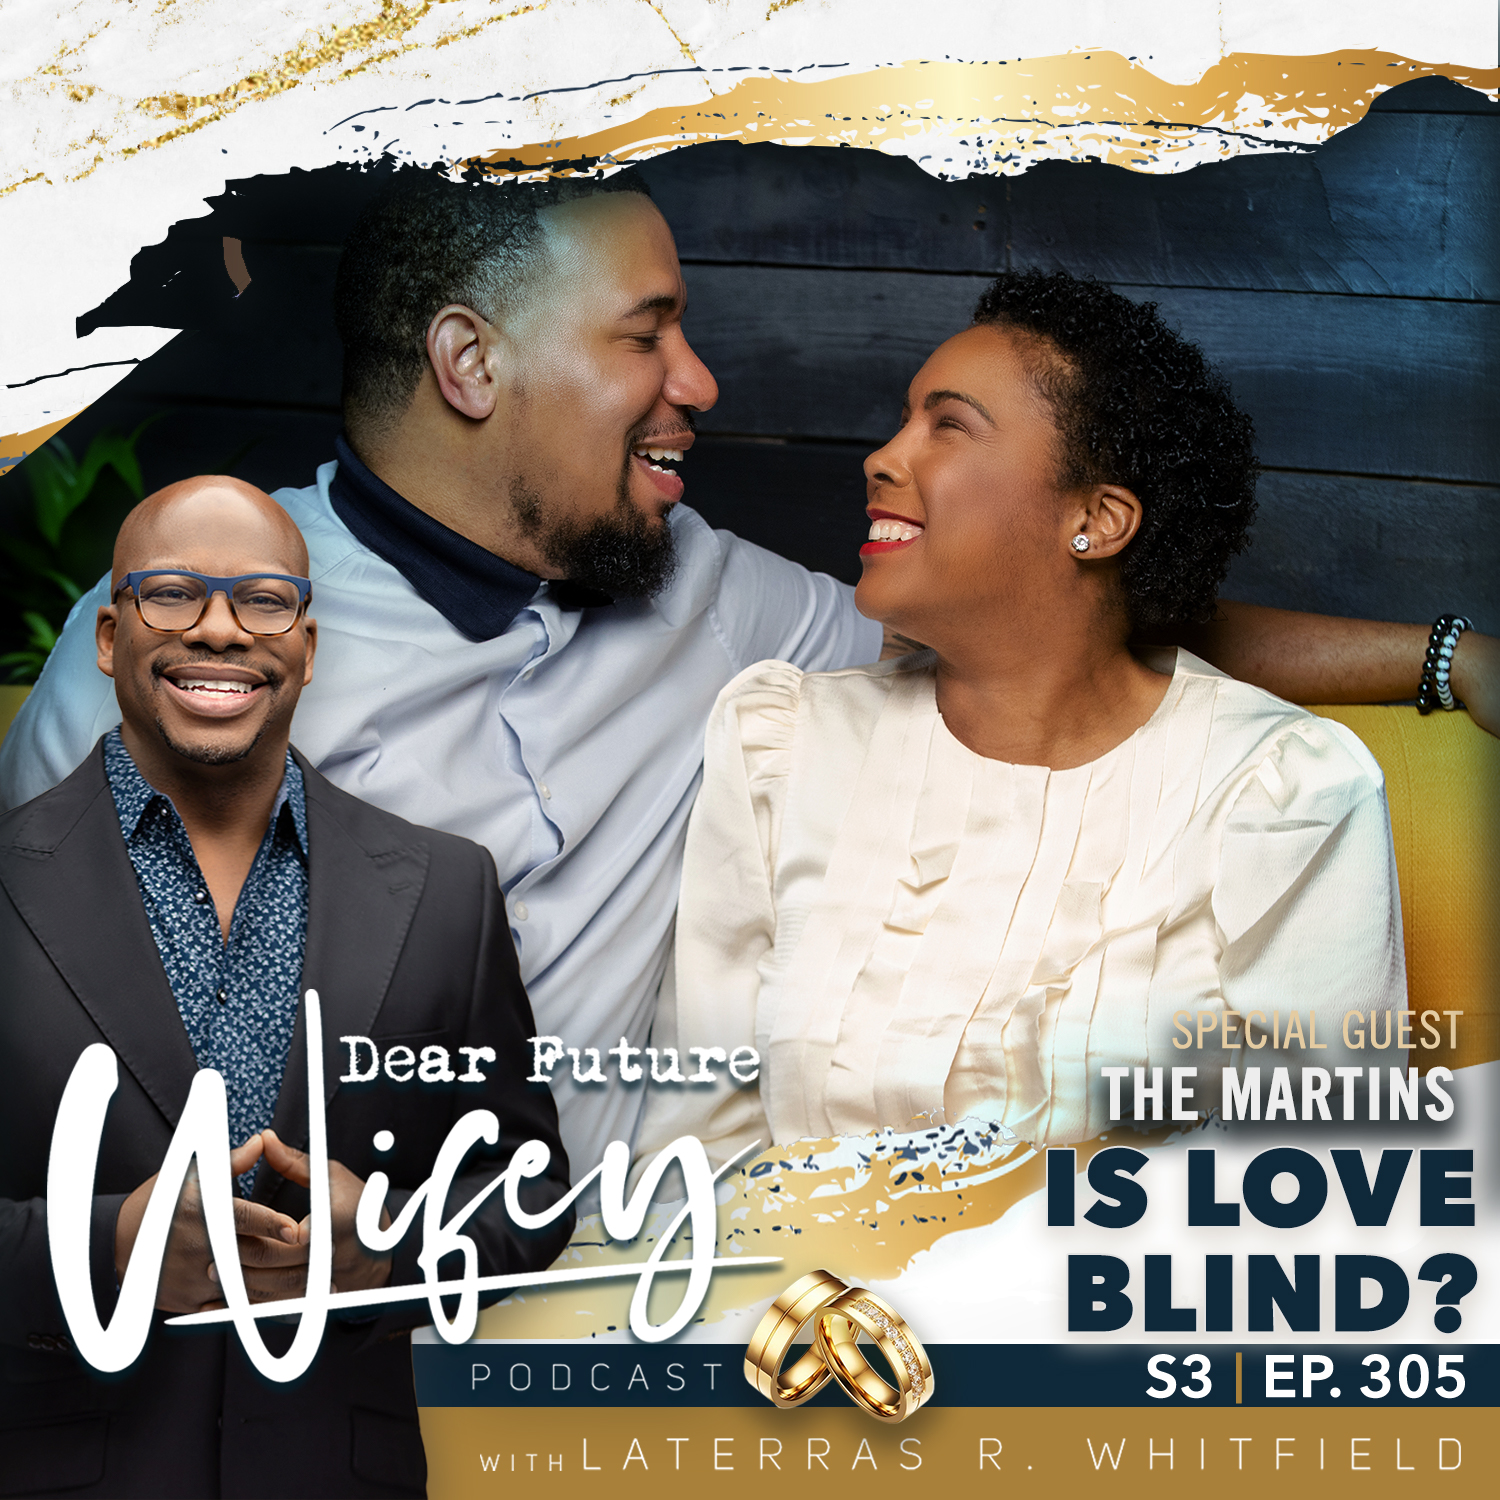 Is Love Blind? (Guests: The Martins)